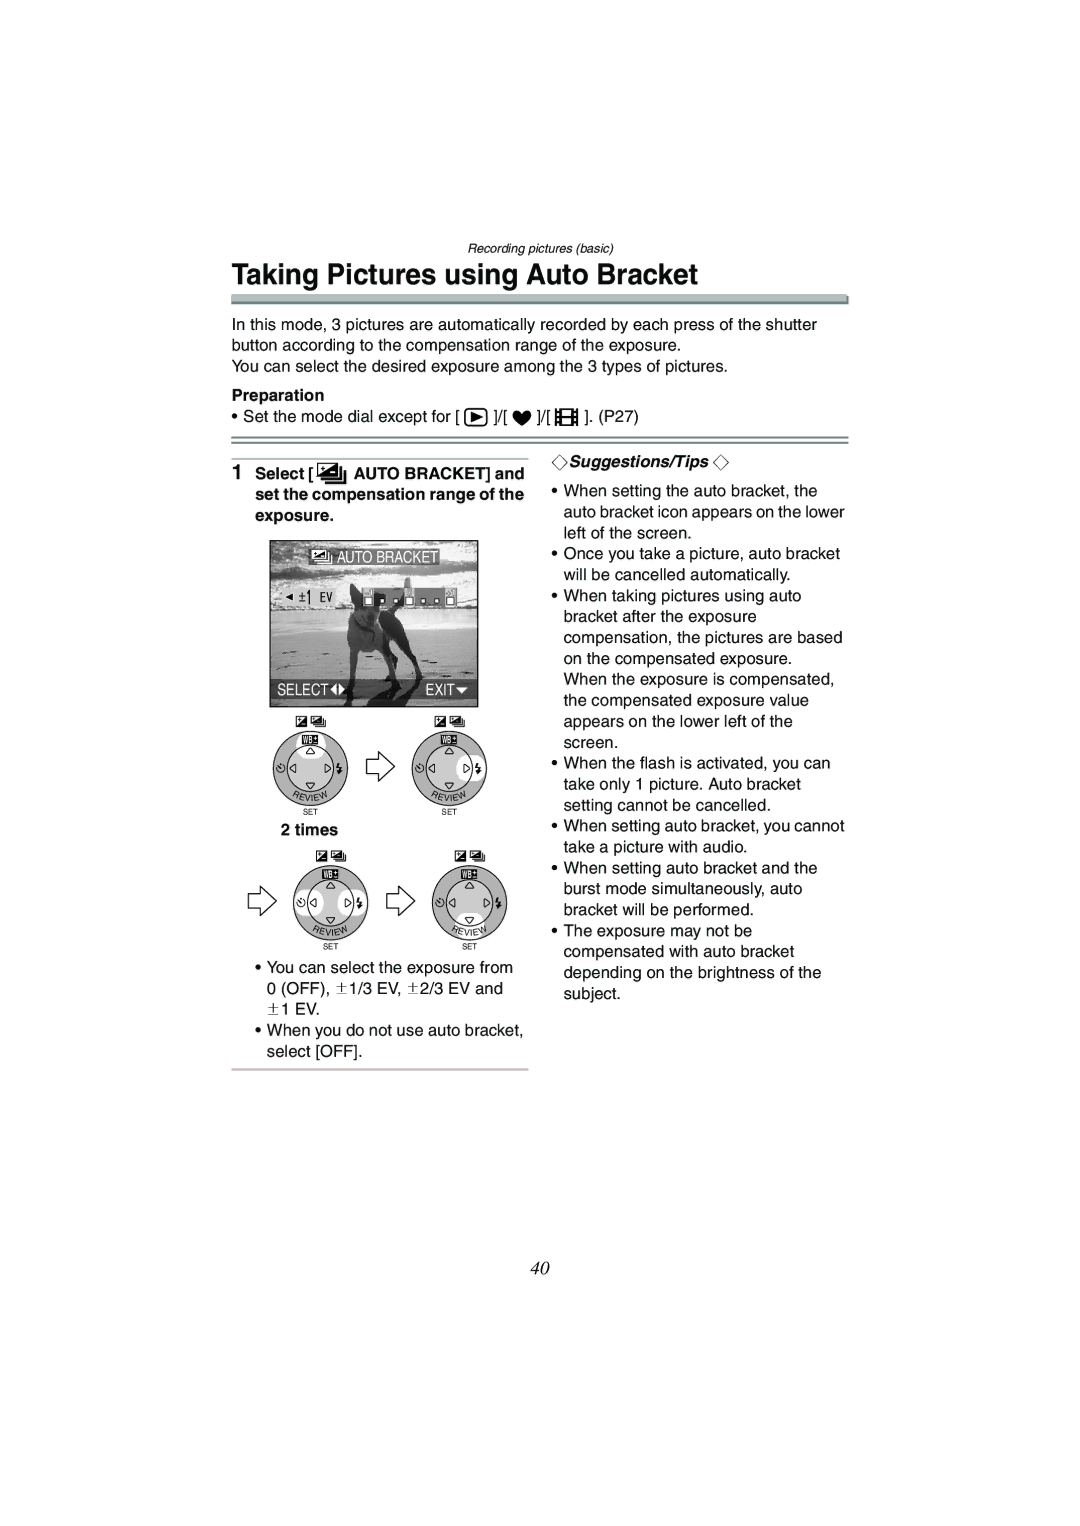 Panasonic DMC-FX5GN, DMC-FX1GN operating instructions Taking Pictures using Auto Bracket, Times 